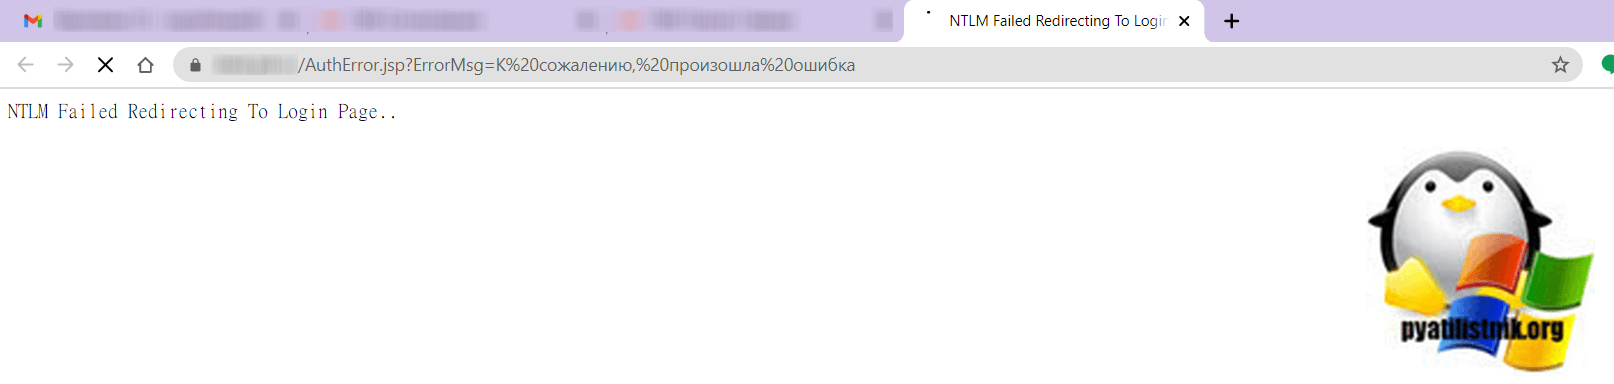 NTLM Failed Redirecting To Login Page